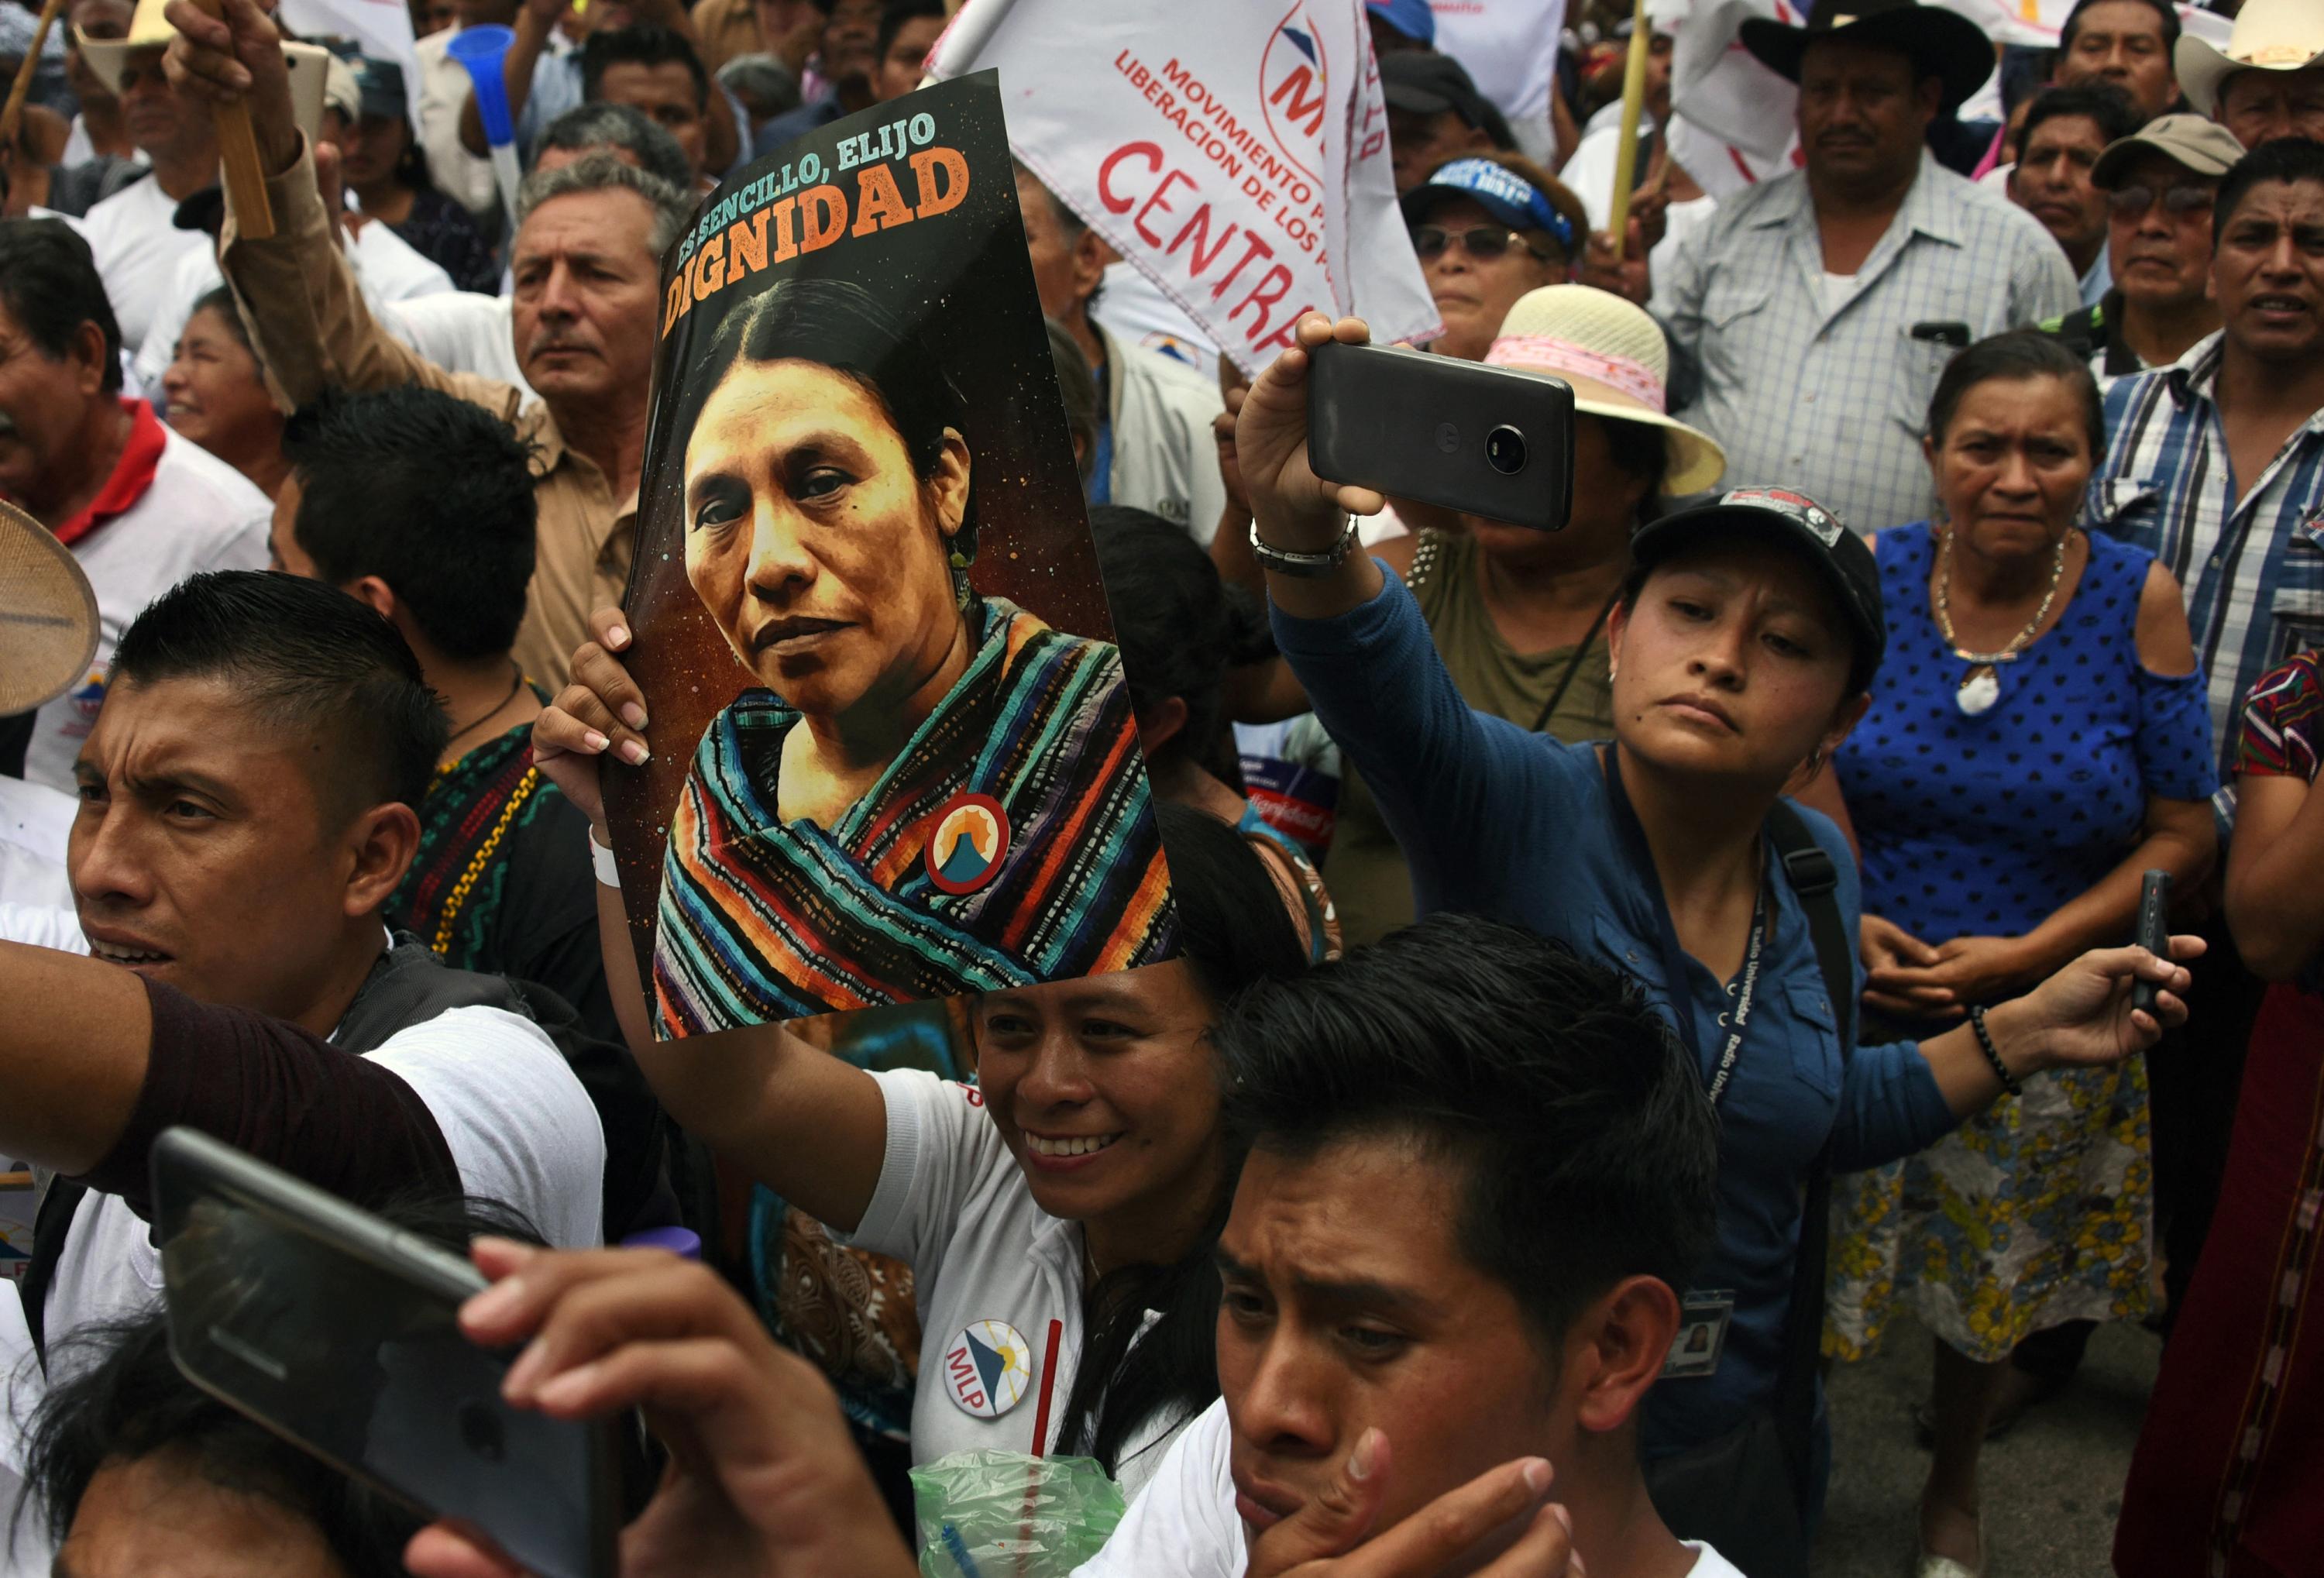 MLP supporters at a June 2019 campaign event for Indigenous candidate Thelma Cabrera in Guatemala City